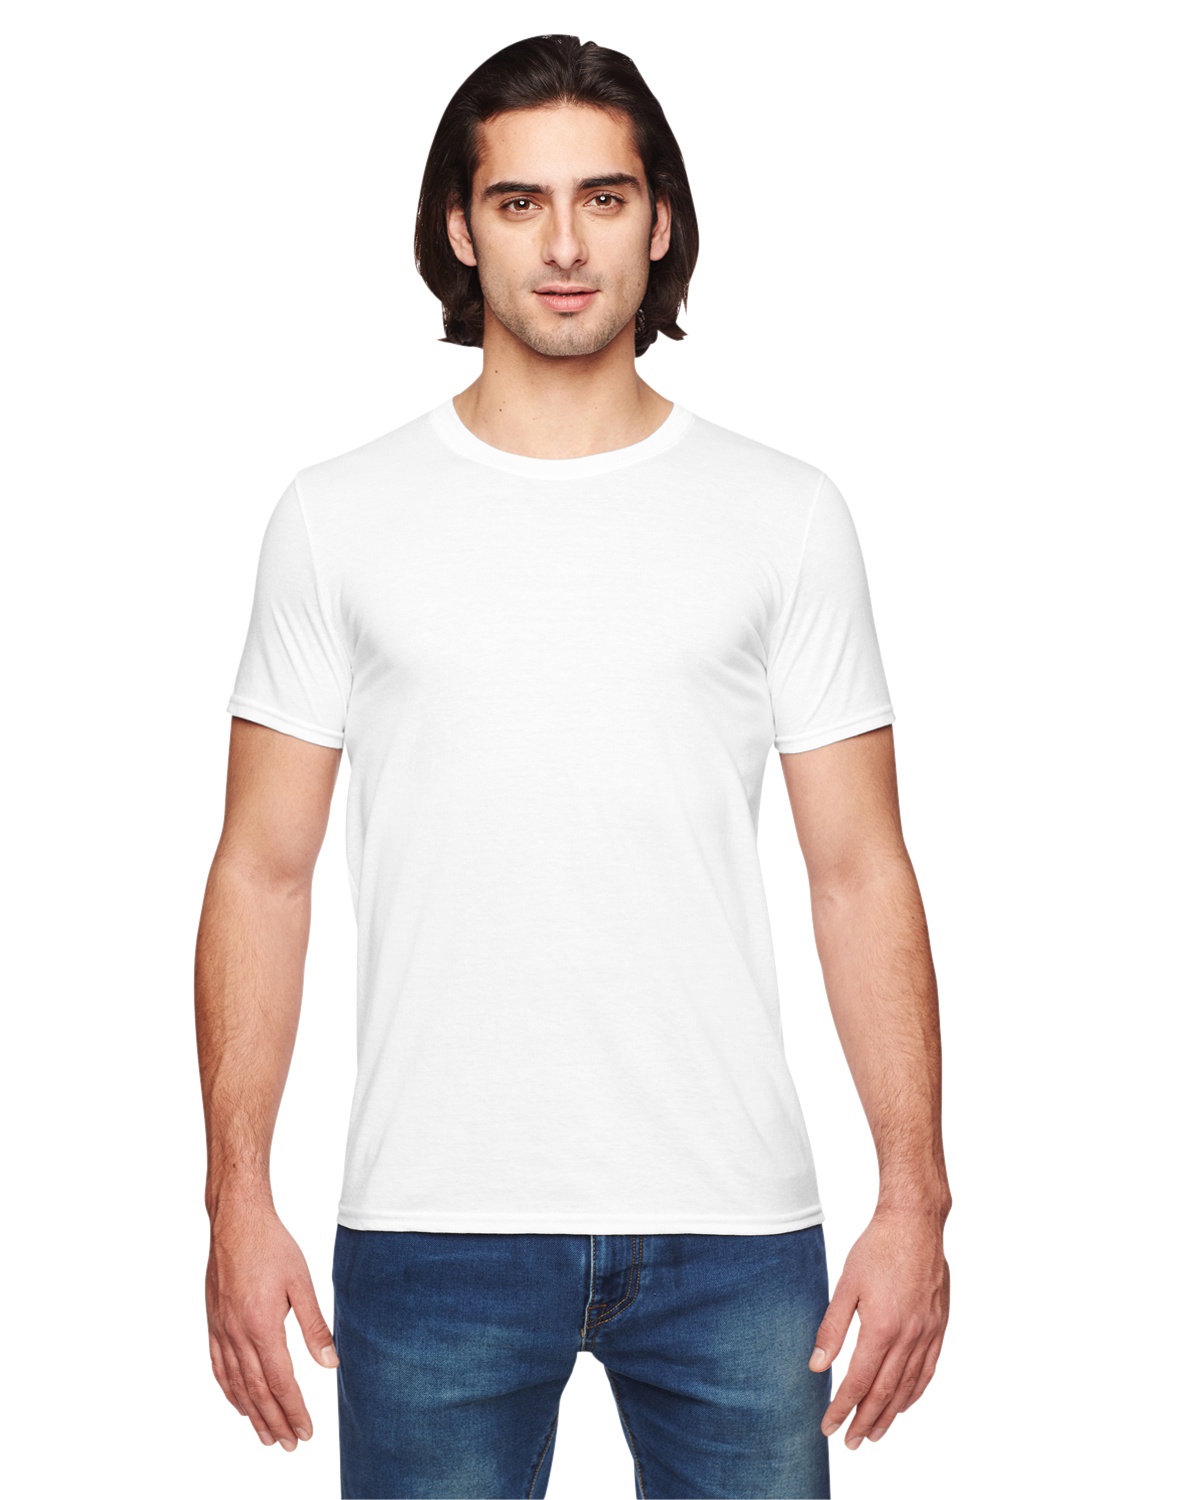 Anvil 6750 Adult Rayon Polyester Cotton T-Shirt-Veetrends.com